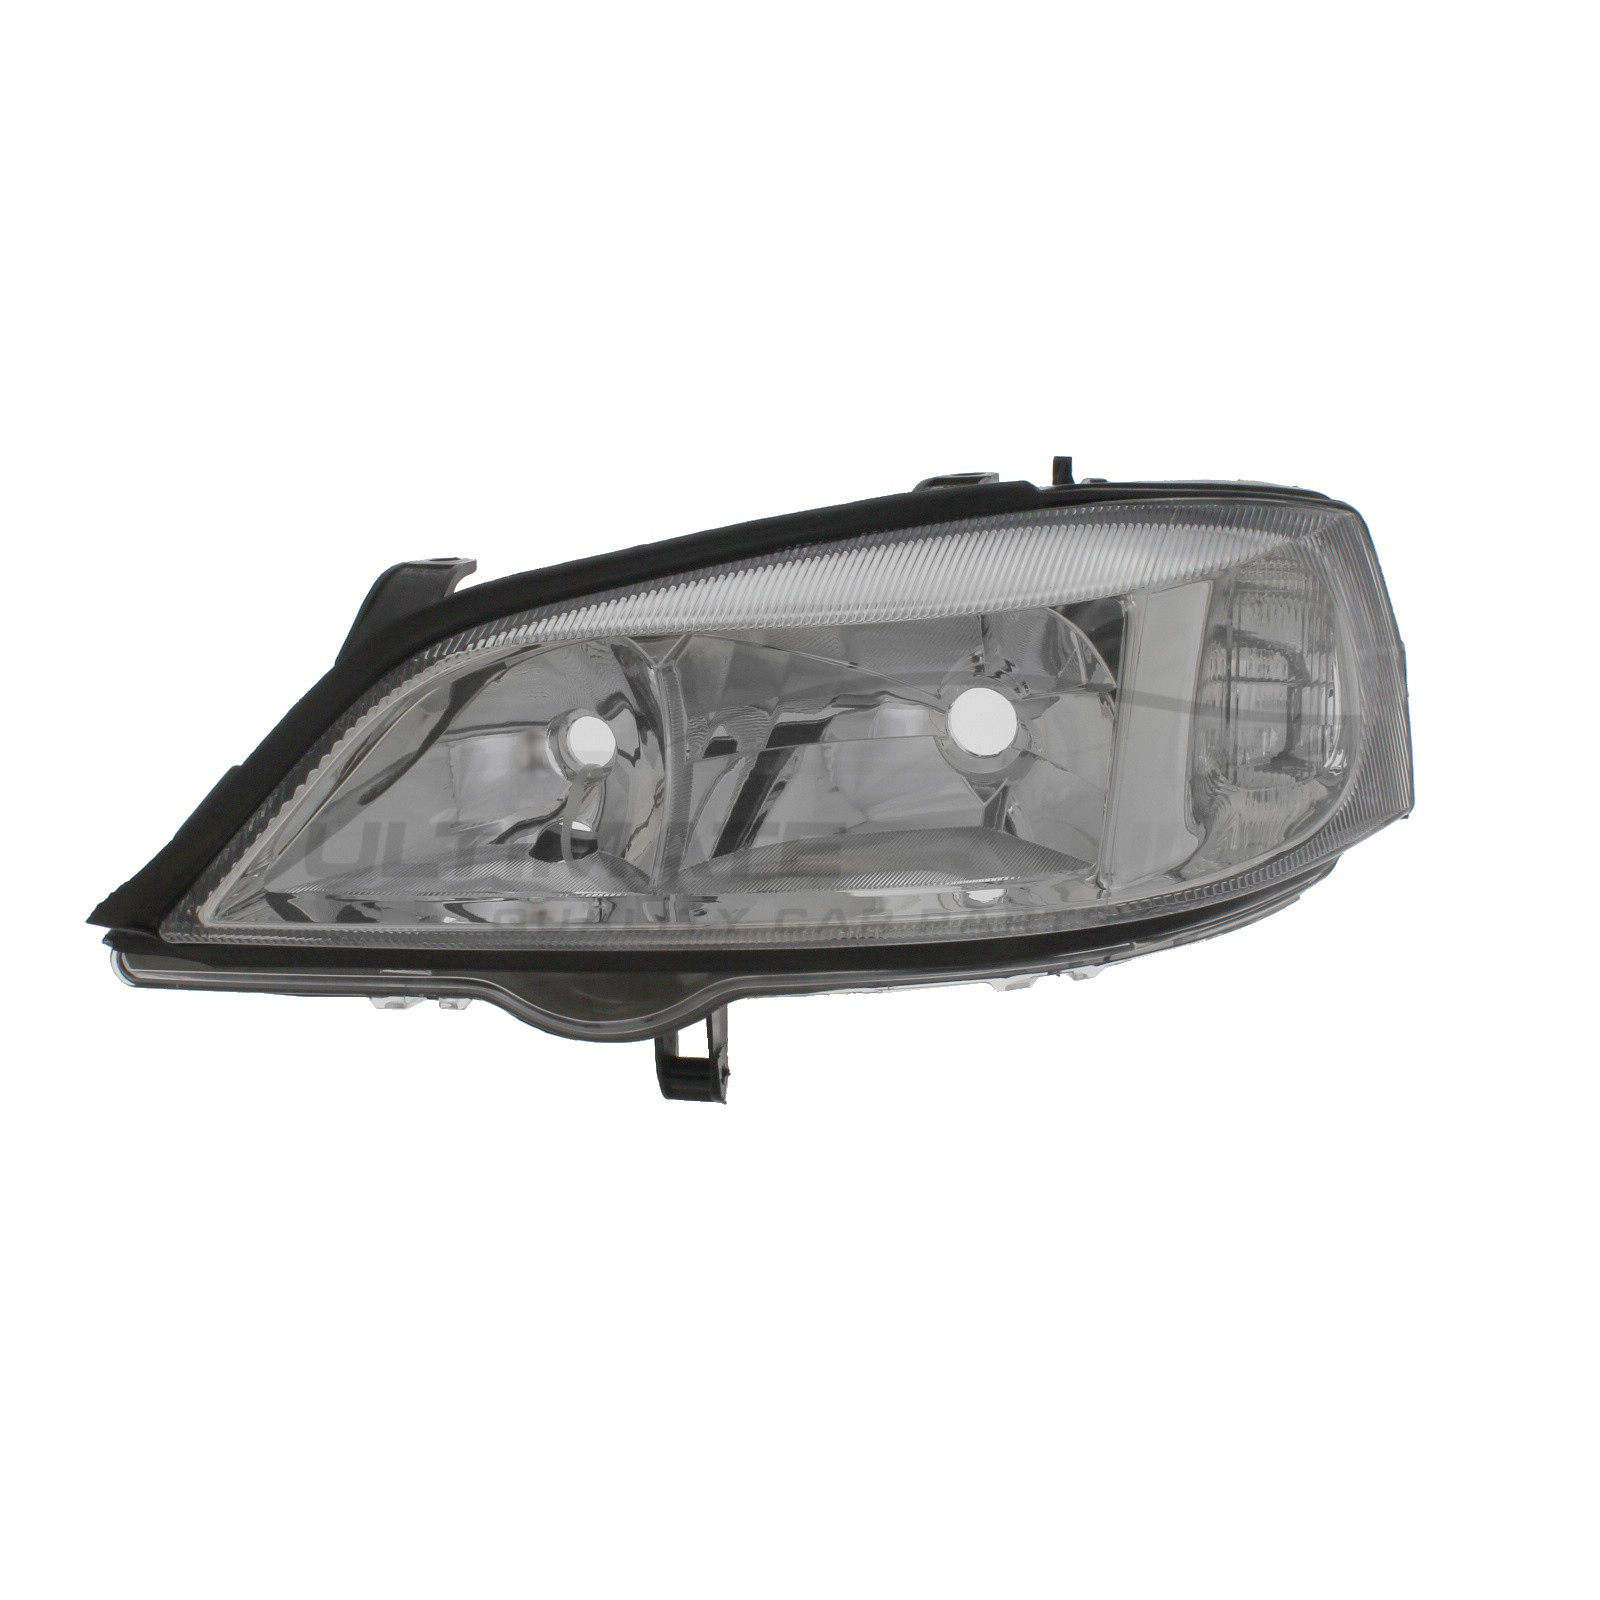 Vauxhall Astra G 1998-2004 Halogen, Electric Without Motor, Headlight / Headlamp with Chrome Surround Passengers Side (LH)